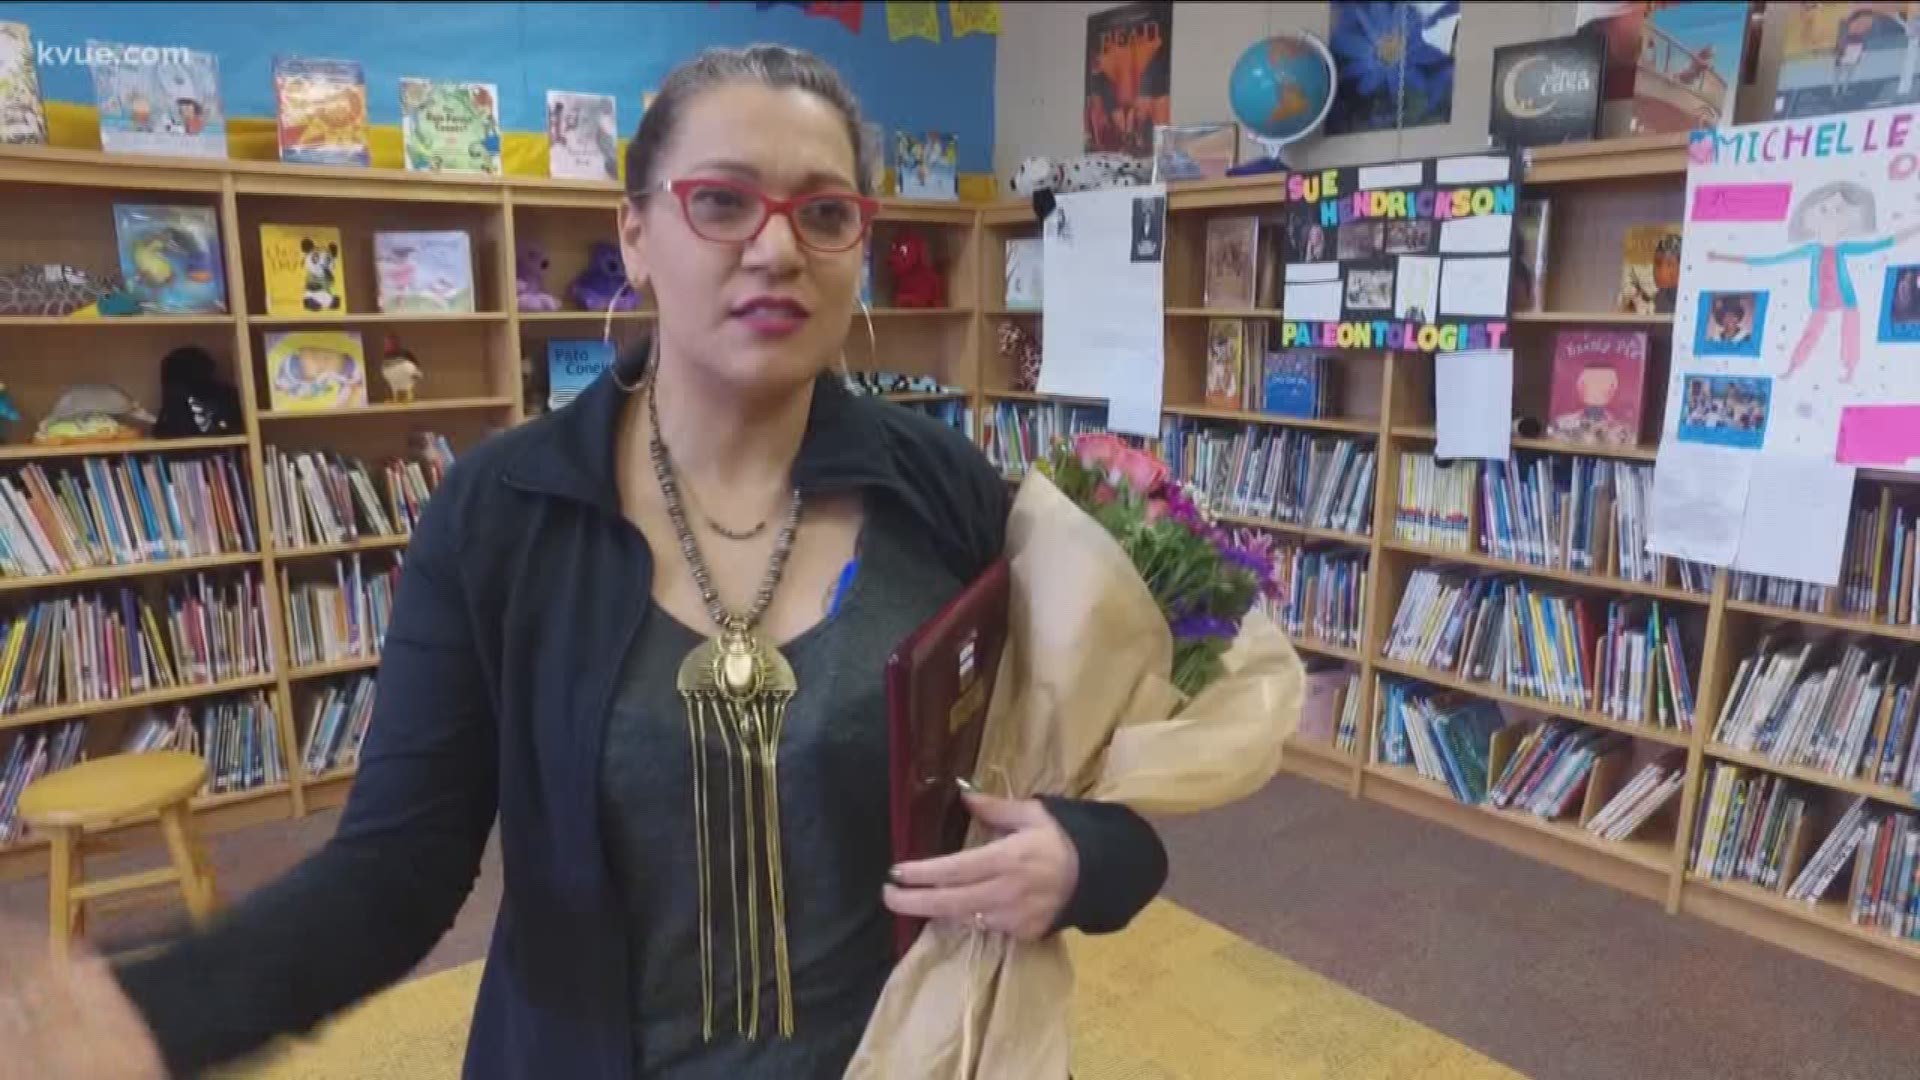 Each year, a handful of Austin ISD teachers are recognized with "Teacher of the Year" awards.